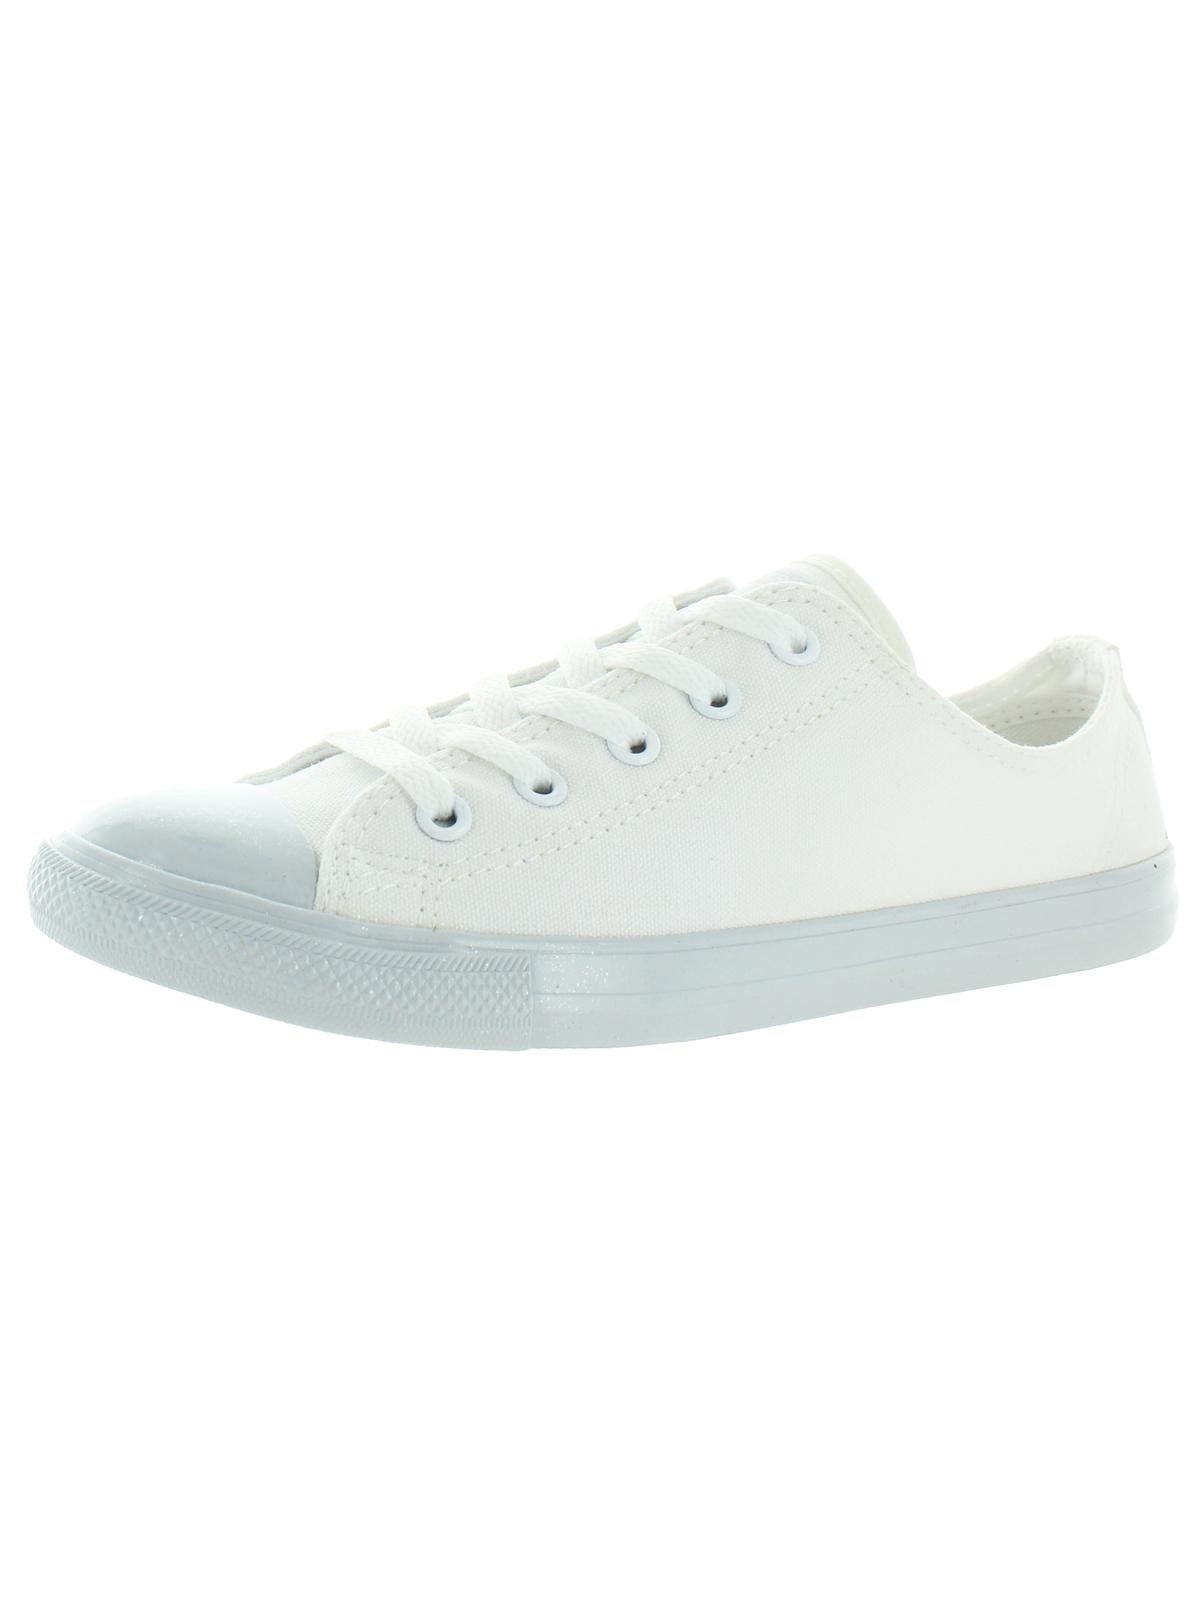 Converse Womens CTAS Dainty Ox Trainers 